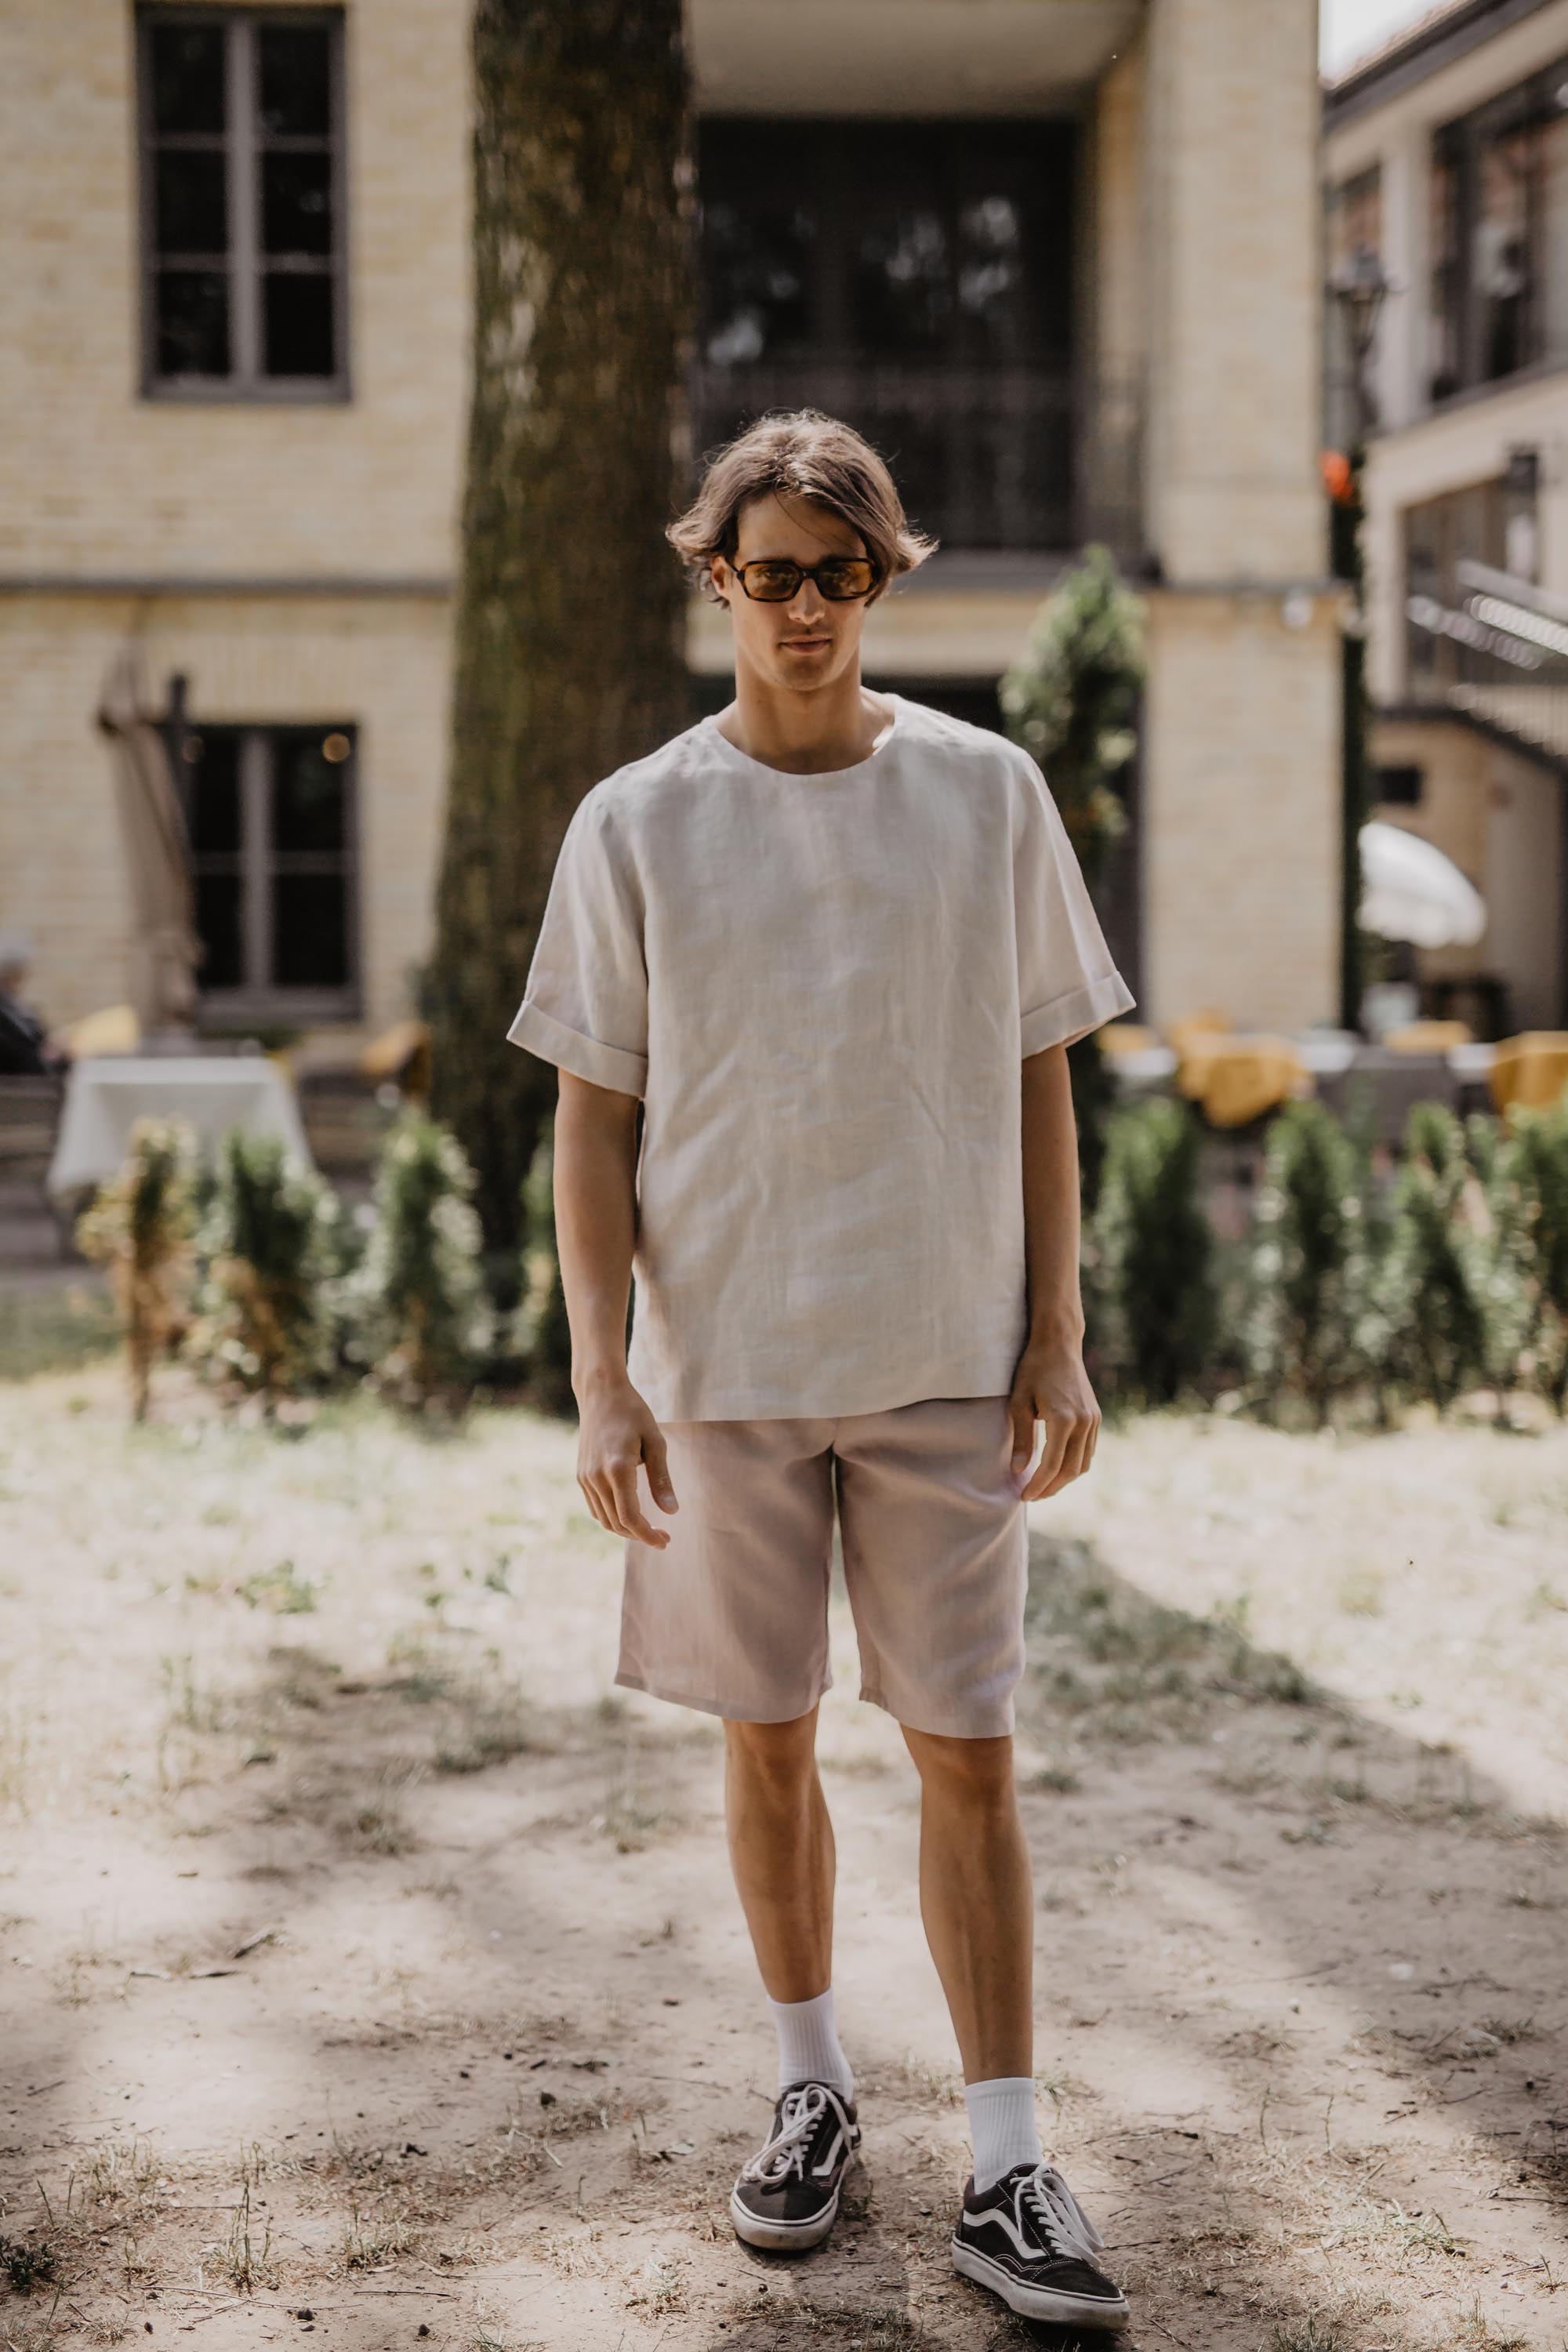 Man Wearing White T-Shirt And Cotton Candy Color Linen Shorts Walking Towards